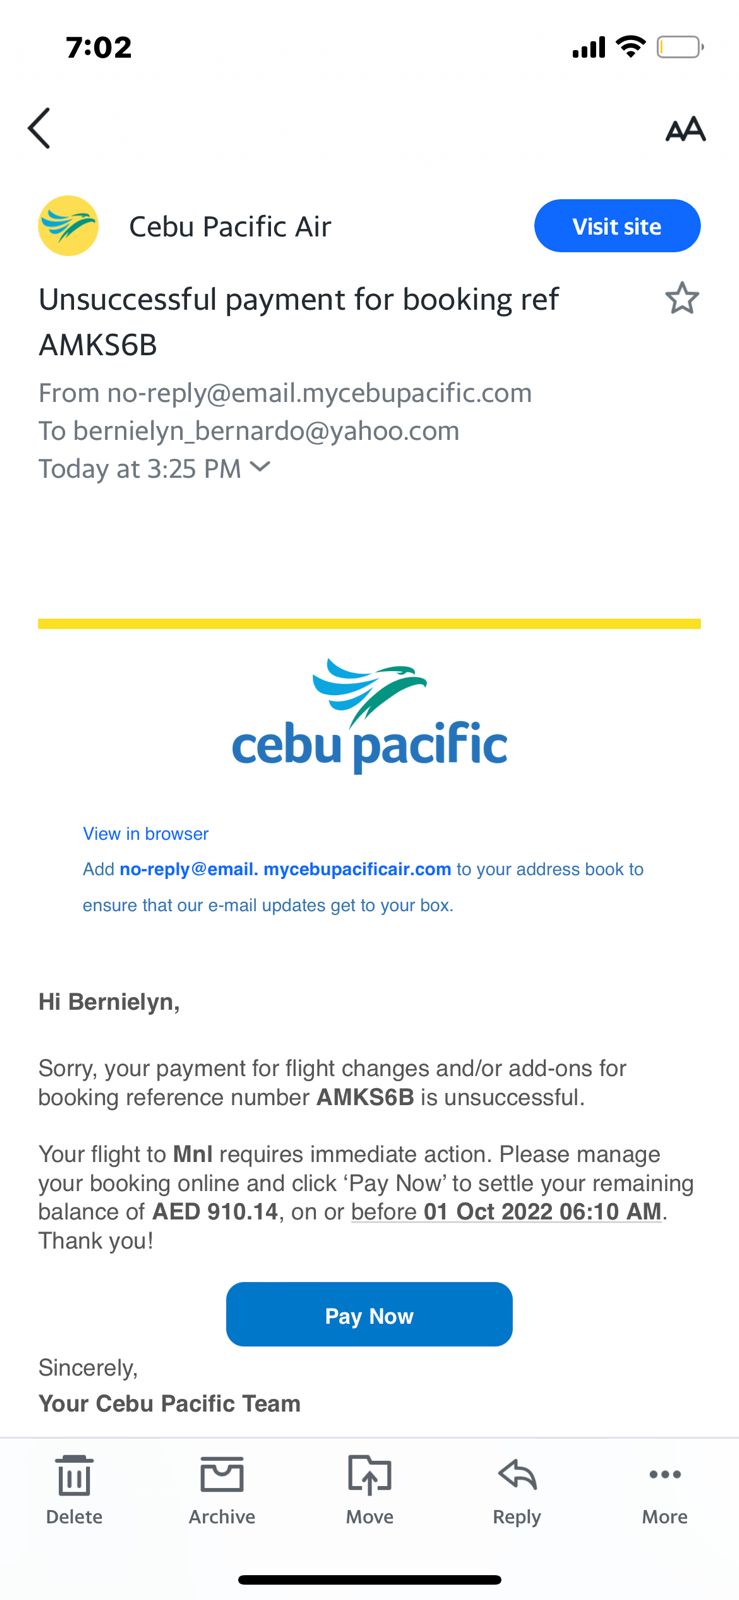 Inbound rebooking has been ed automatically prior to payment